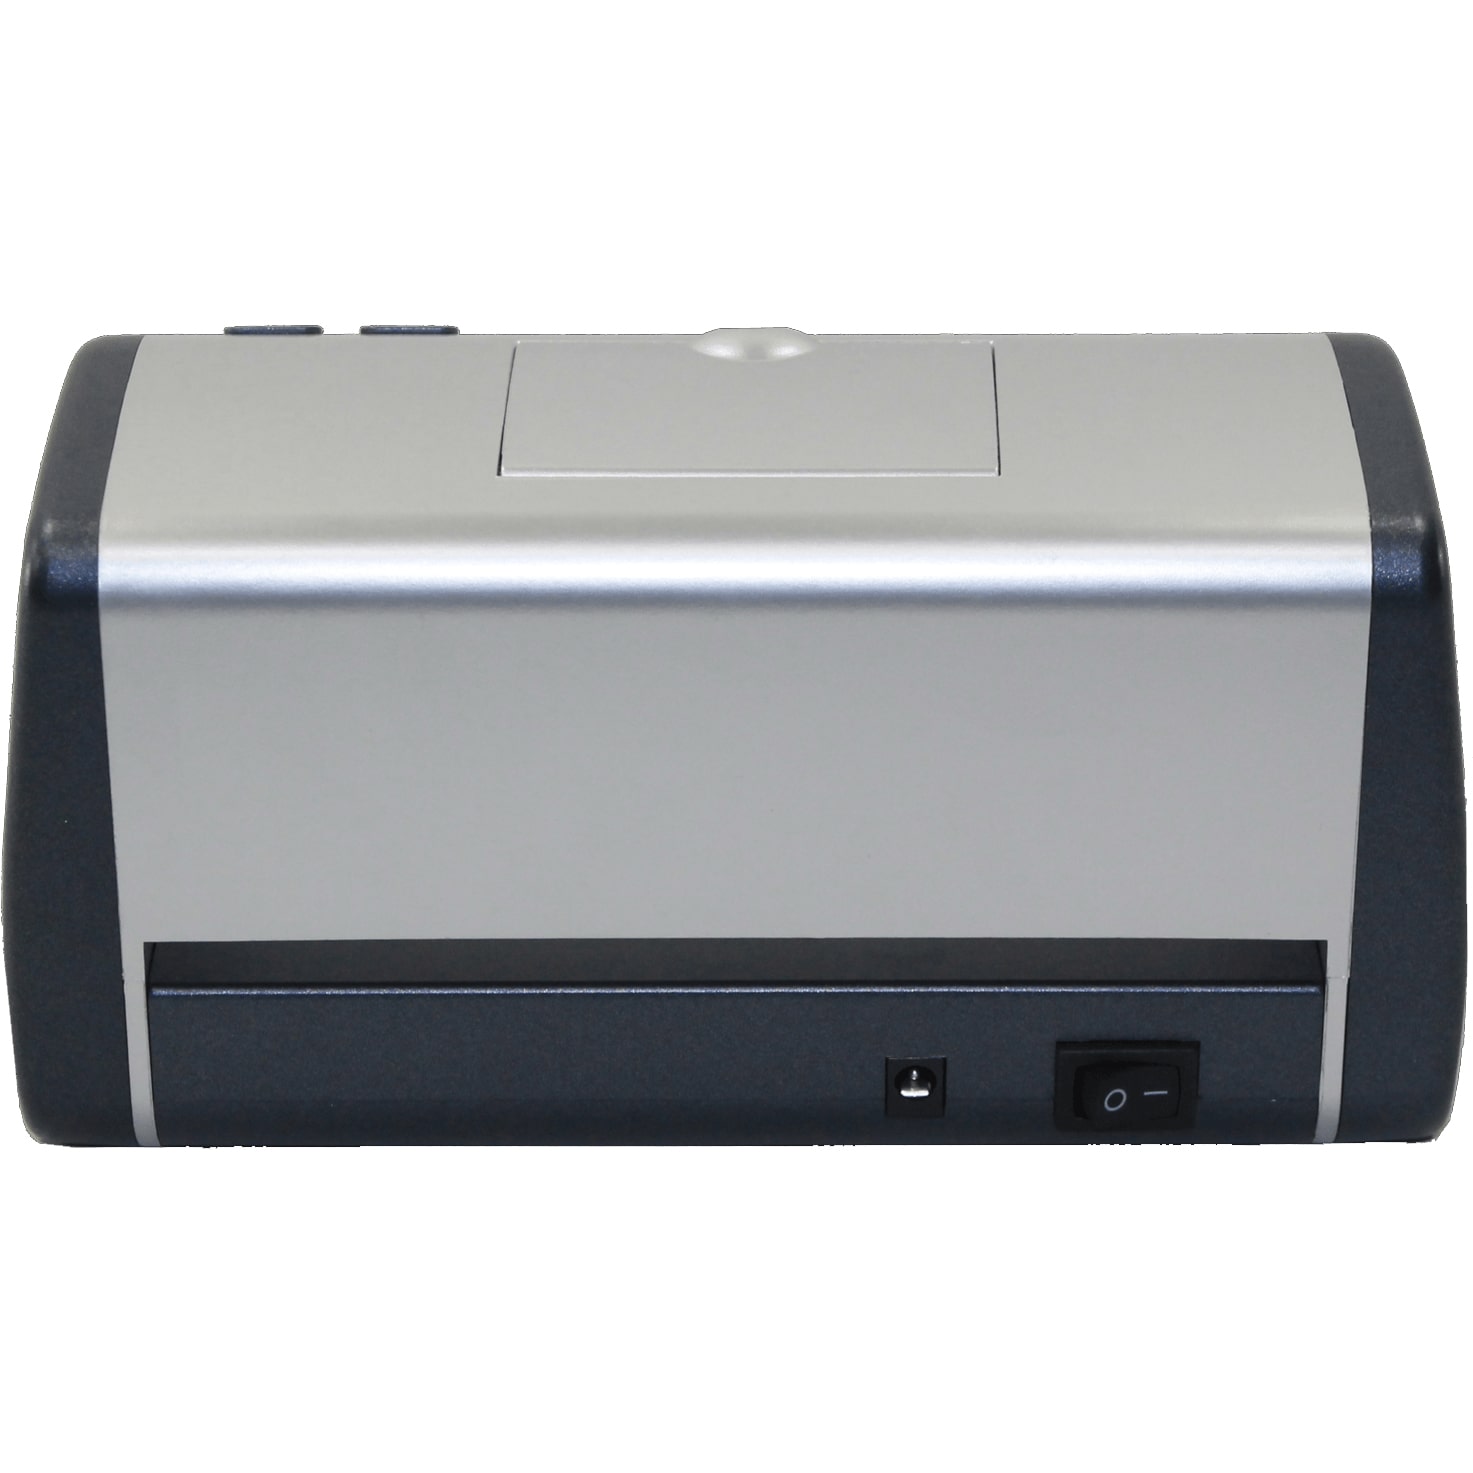 3-AccuBANKER LED430 counterfeit detector